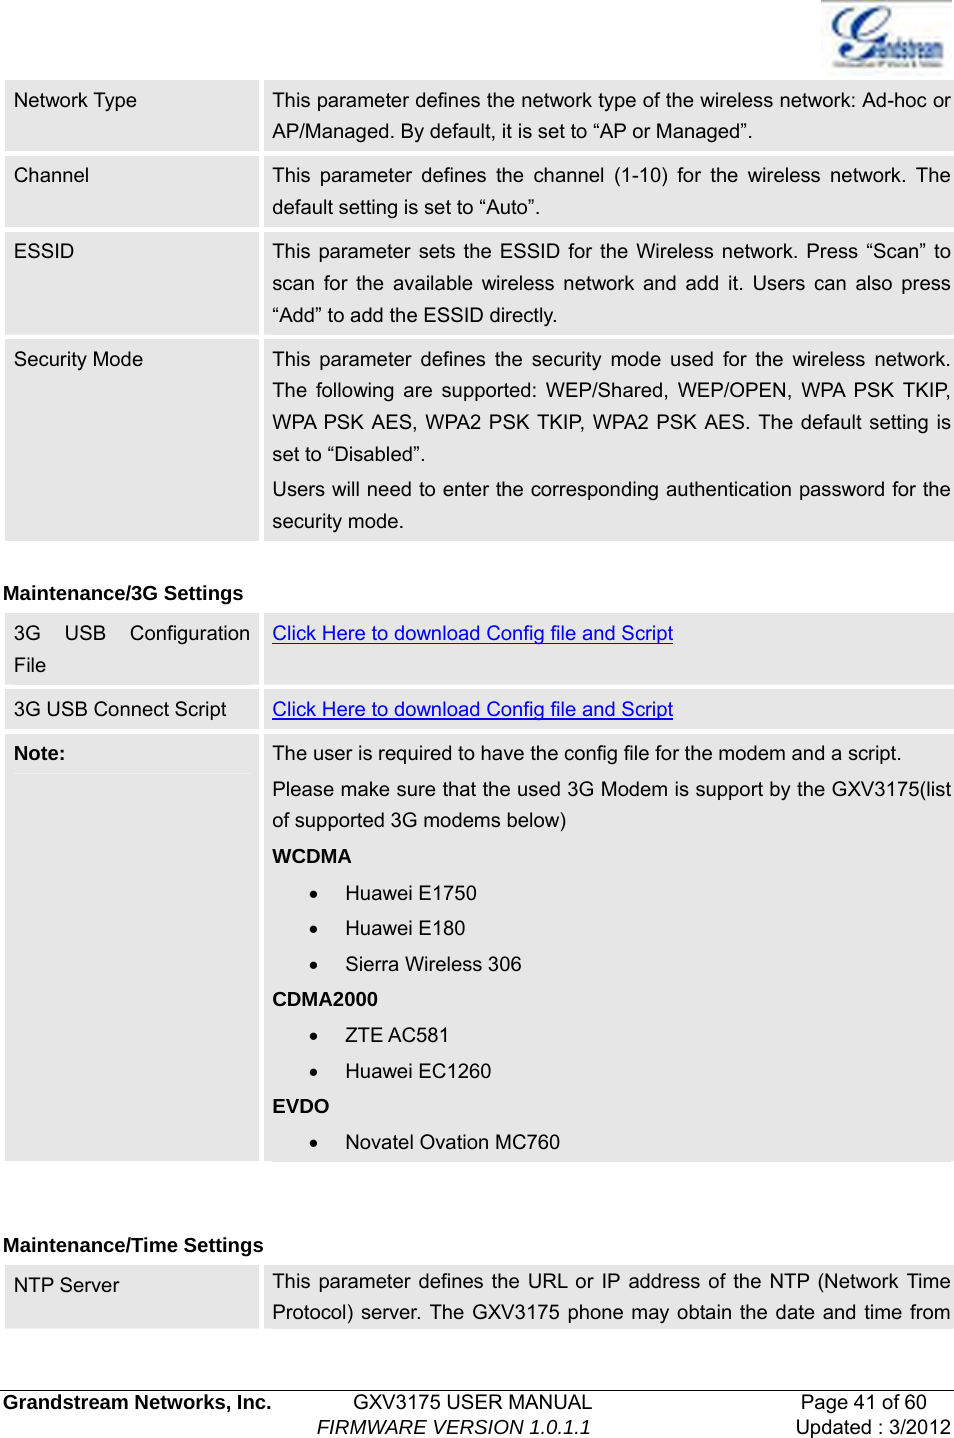   Grandstream Networks, Inc.        GXV3175 USER MANUAL                     Page 41 of 60                                FIRMWARE VERSION 1.0.1.1 Updated : 3/2012  Network Type  This parameter defines the network type of the wireless network: Ad-hoc or AP/Managed. By default, it is set to “AP or Managed”.   Channel  This parameter defines the channel (1-10) for the wireless network. The default setting is set to “Auto”.   ESSID  This parameter sets the ESSID for the Wireless network. Press “Scan” to scan for the available wireless network and add it. Users can also press “Add” to add the ESSID directly.   Security Mode  This parameter defines the security mode used for the wireless network. The following are supported: WEP/Shared, WEP/OPEN, WPA PSK TKIP, WPA PSK AES, WPA2 PSK TKIP, WPA2 PSK AES. The default setting is set to “Disabled”.   Users will need to enter the corresponding authentication password for the security mode.    Maintenance/3G Settings 3G USB Configuration File Click Here to download Config file and Script 3G USB Connect Script  Click Here to download Config file and Script Note:  The user is required to have the config file for the modem and a script. Please make sure that the used 3G Modem is support by the GXV3175(list of supported 3G modems below) WCDMA • Huawei E1750 • Huawei E180 • Sierra Wireless 306 CDMA2000 • ZTE AC581 • Huawei EC1260 EVDO • Novatel Ovation MC760   Maintenance/Time Settings NTP Server  This parameter defines the URL or IP address of the NTP (Network Time Protocol) server. The GXV3175 phone may obtain the date and time from 